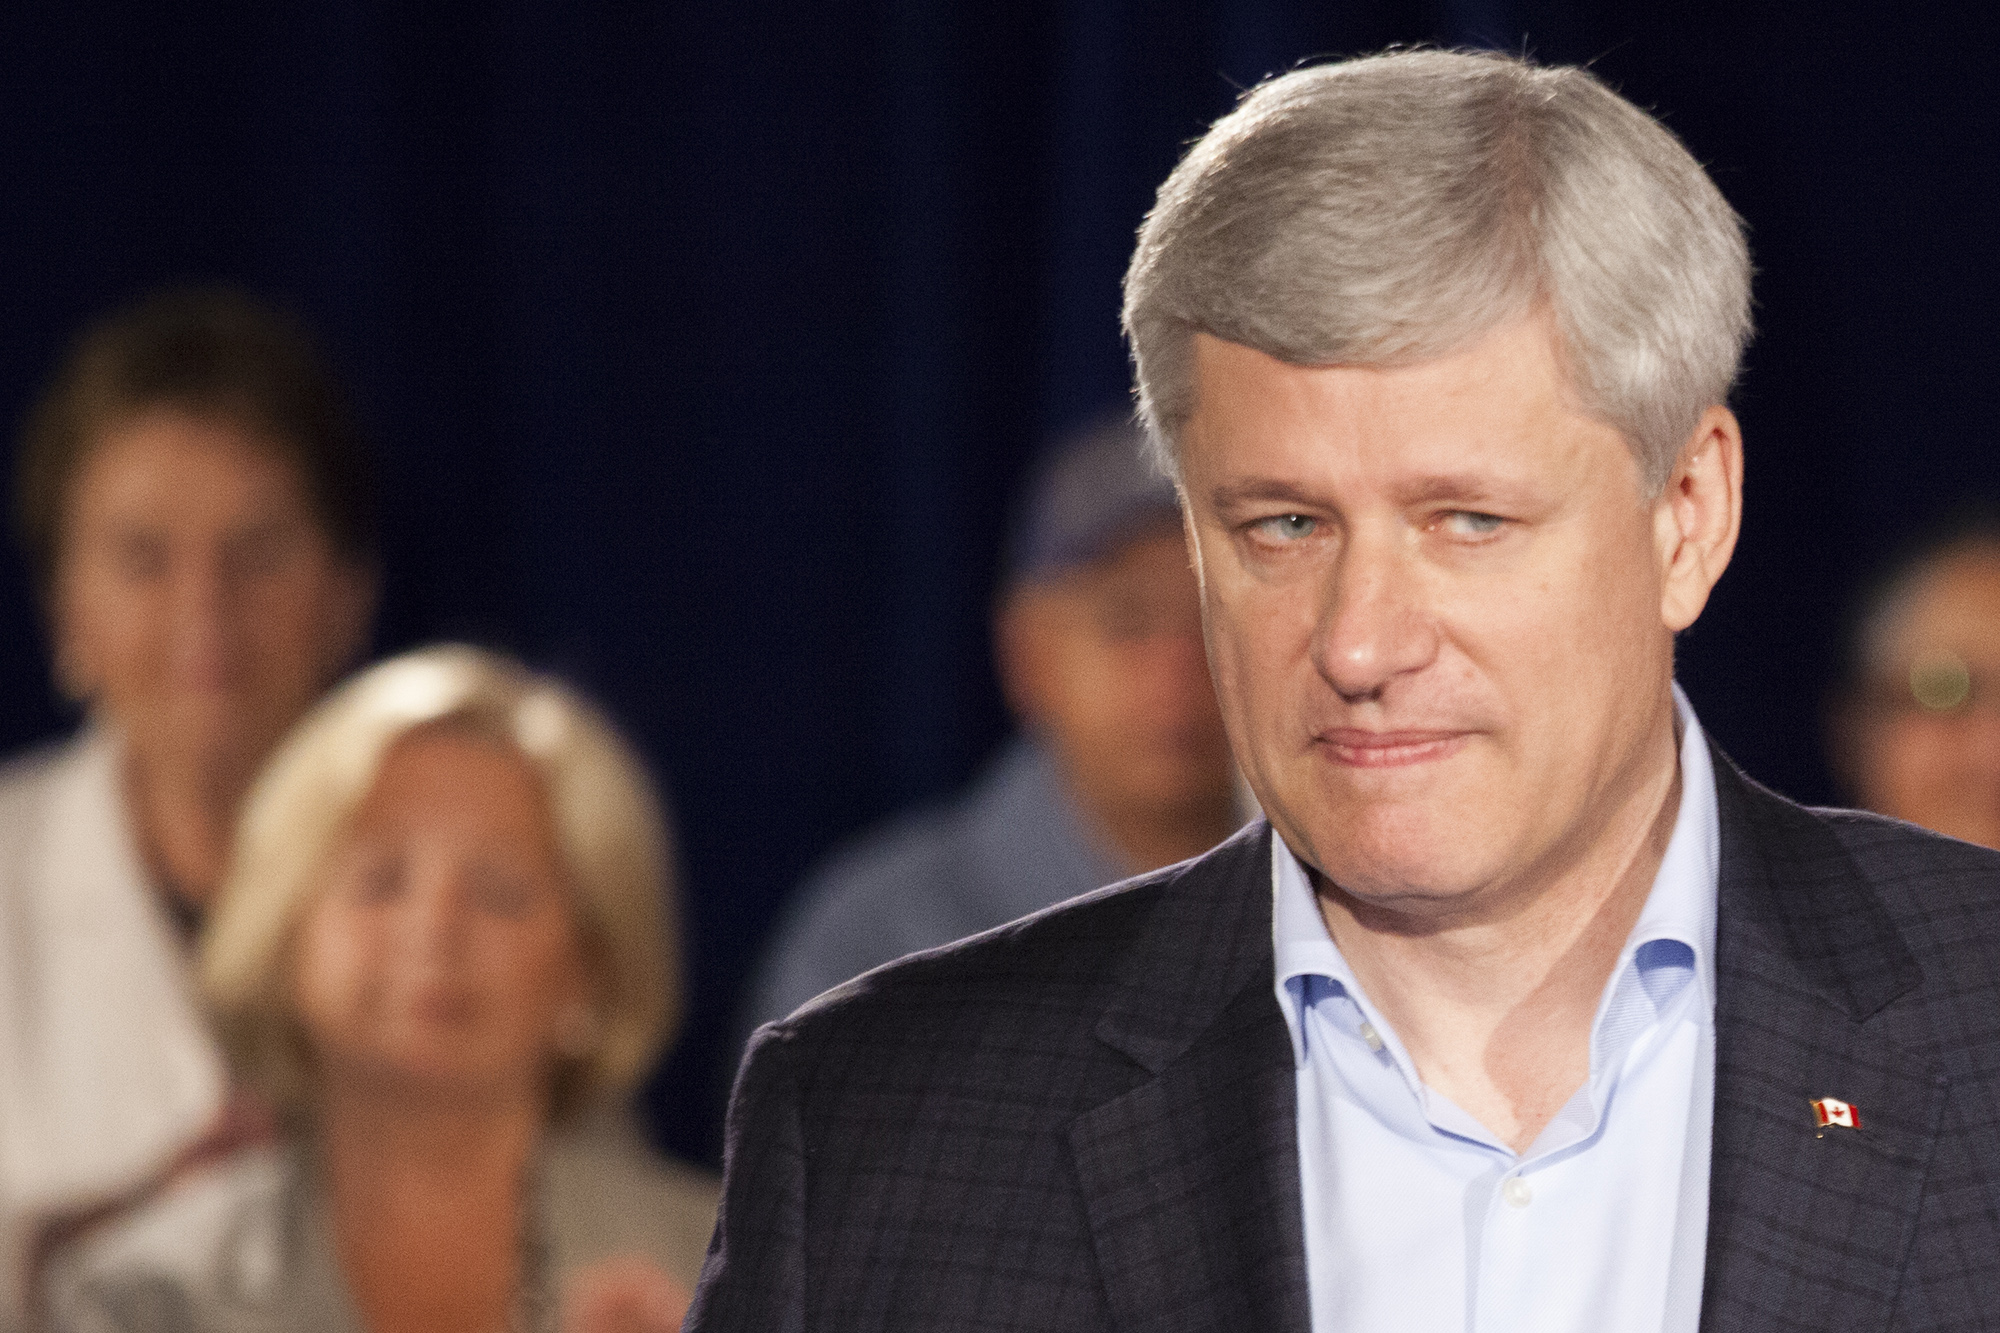 stephen harper grimaces at reporters in north vancouver - mychaylo prystupa national observer